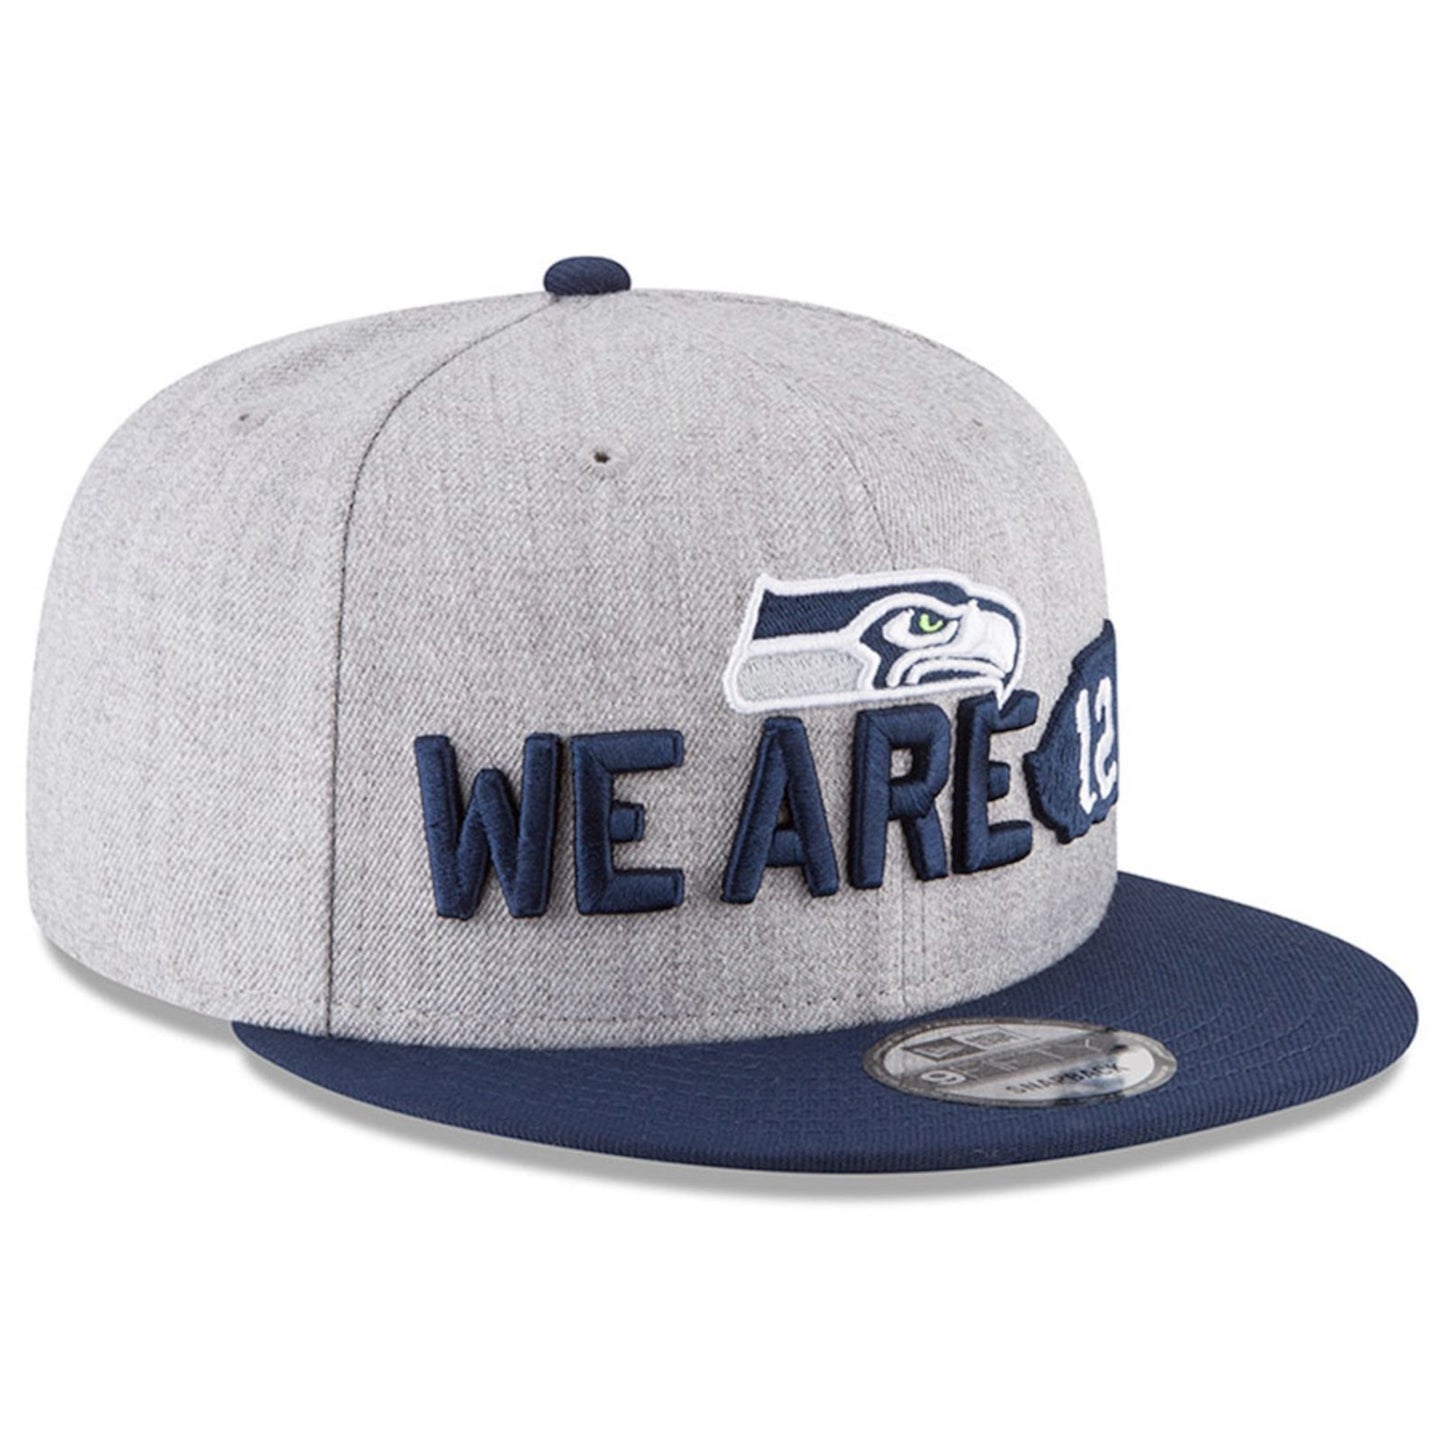 Seattle Seahawks New Era 2018 NFL Draft On-Stage 9Fifty Snapback Hat - Graphite